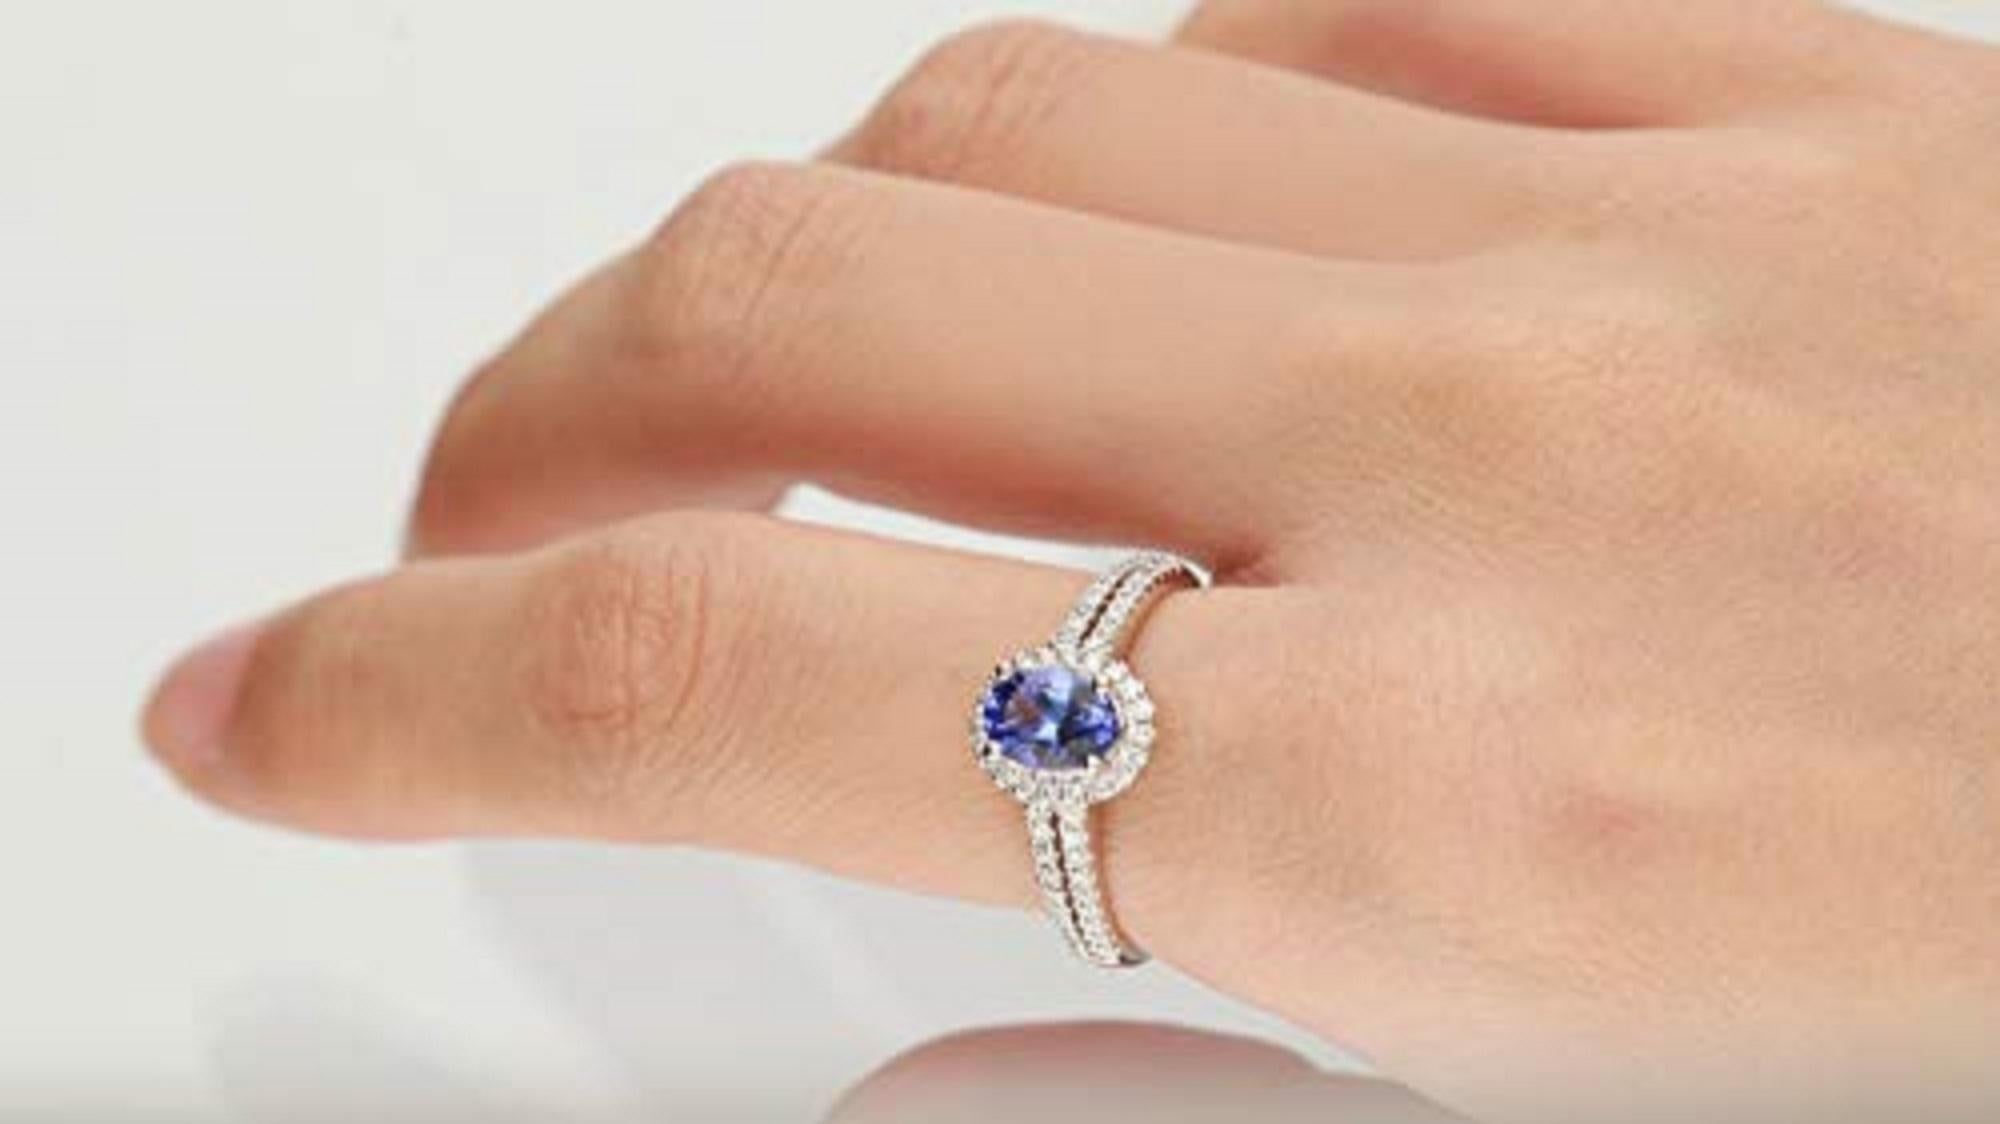 Stunning, timeless and classy eternity Unique Ring. Decorate yourself in luxury with this Gin & Grace Ring. The 14K White Gold jewelry boasts Oval-Shape Prong Setting Genuine Tanzanite (1 pc) 0.74 Carat along with Natural Round cut white Diamond (56